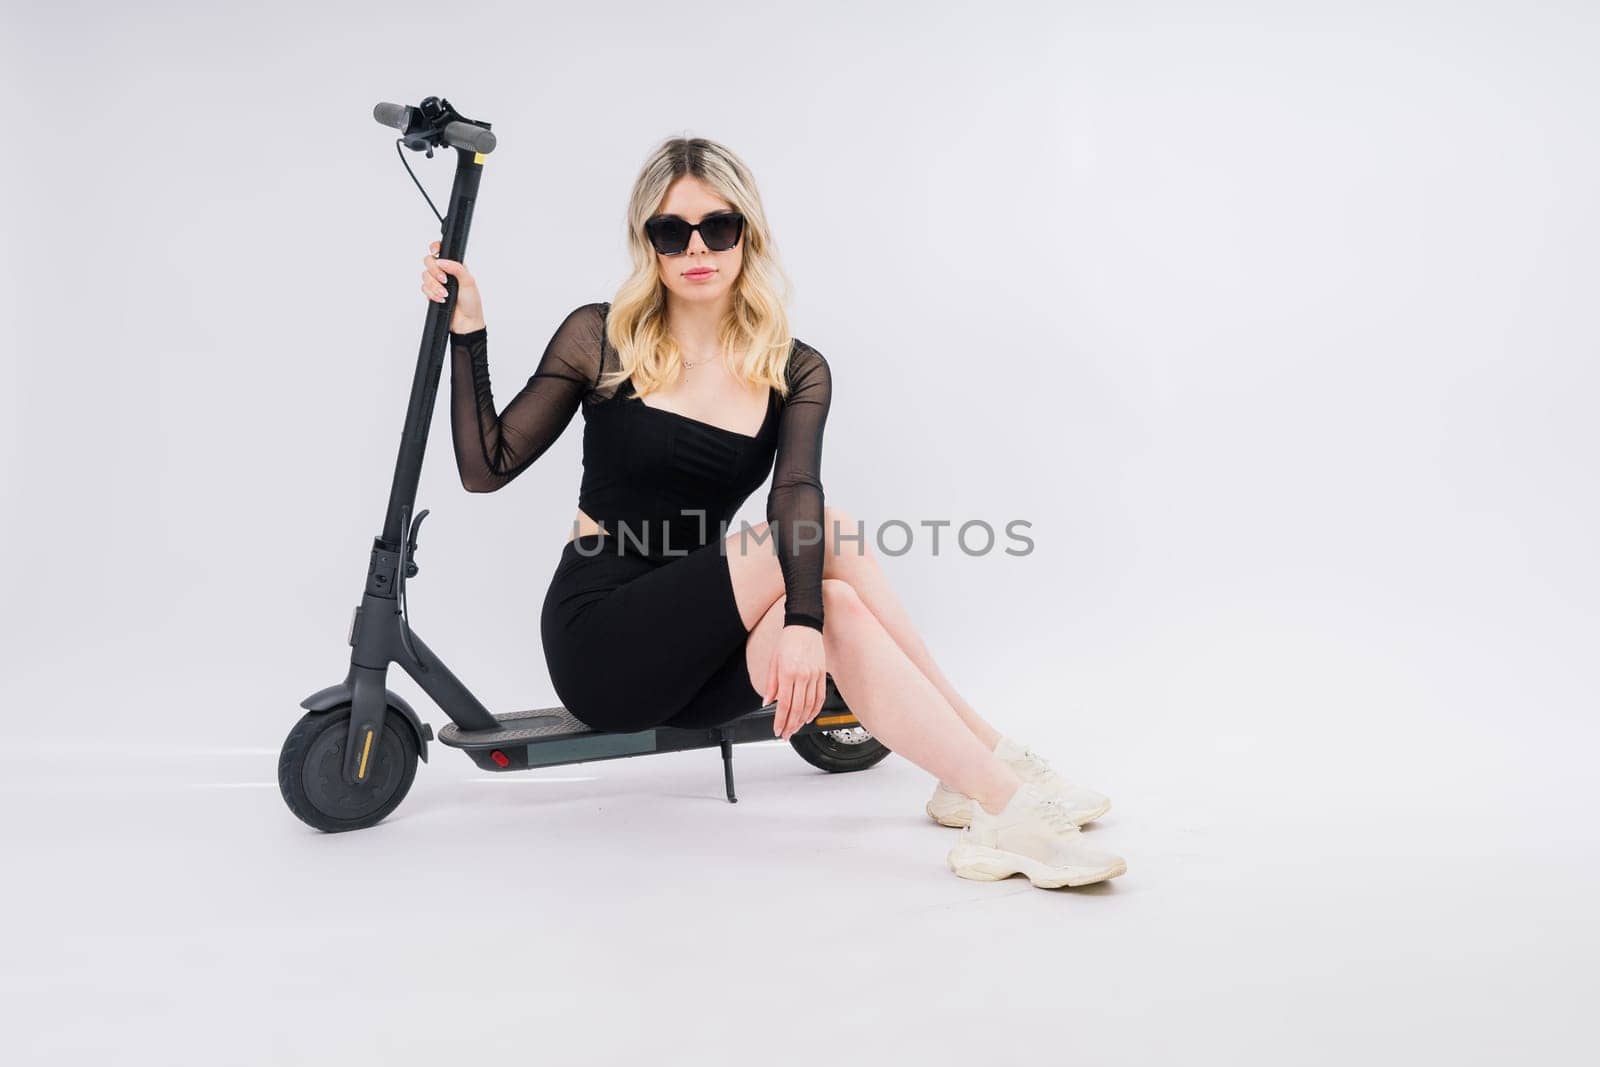 Beautiful emotional young female in a sport clothes on electric scooter on red and white background